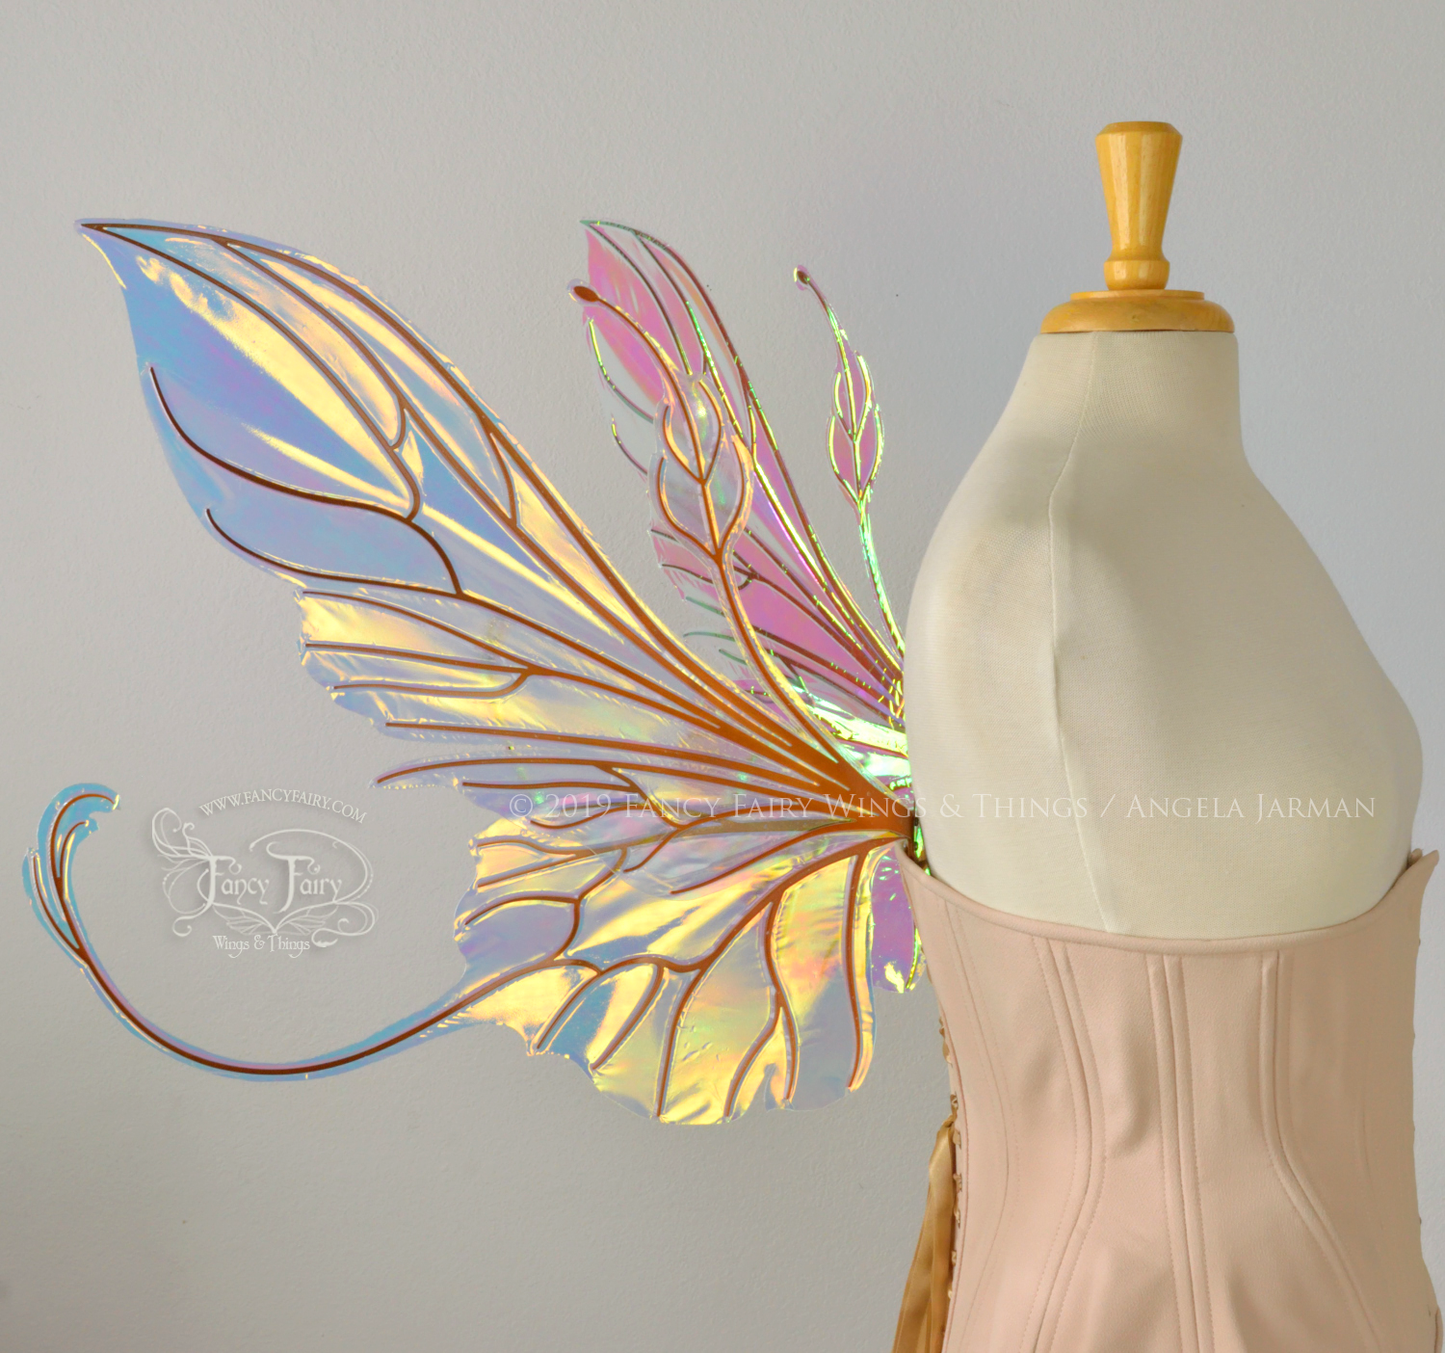 Elvina Iridescent Convertible Fairy Wings in Clear Diamond Fire with Copper veins